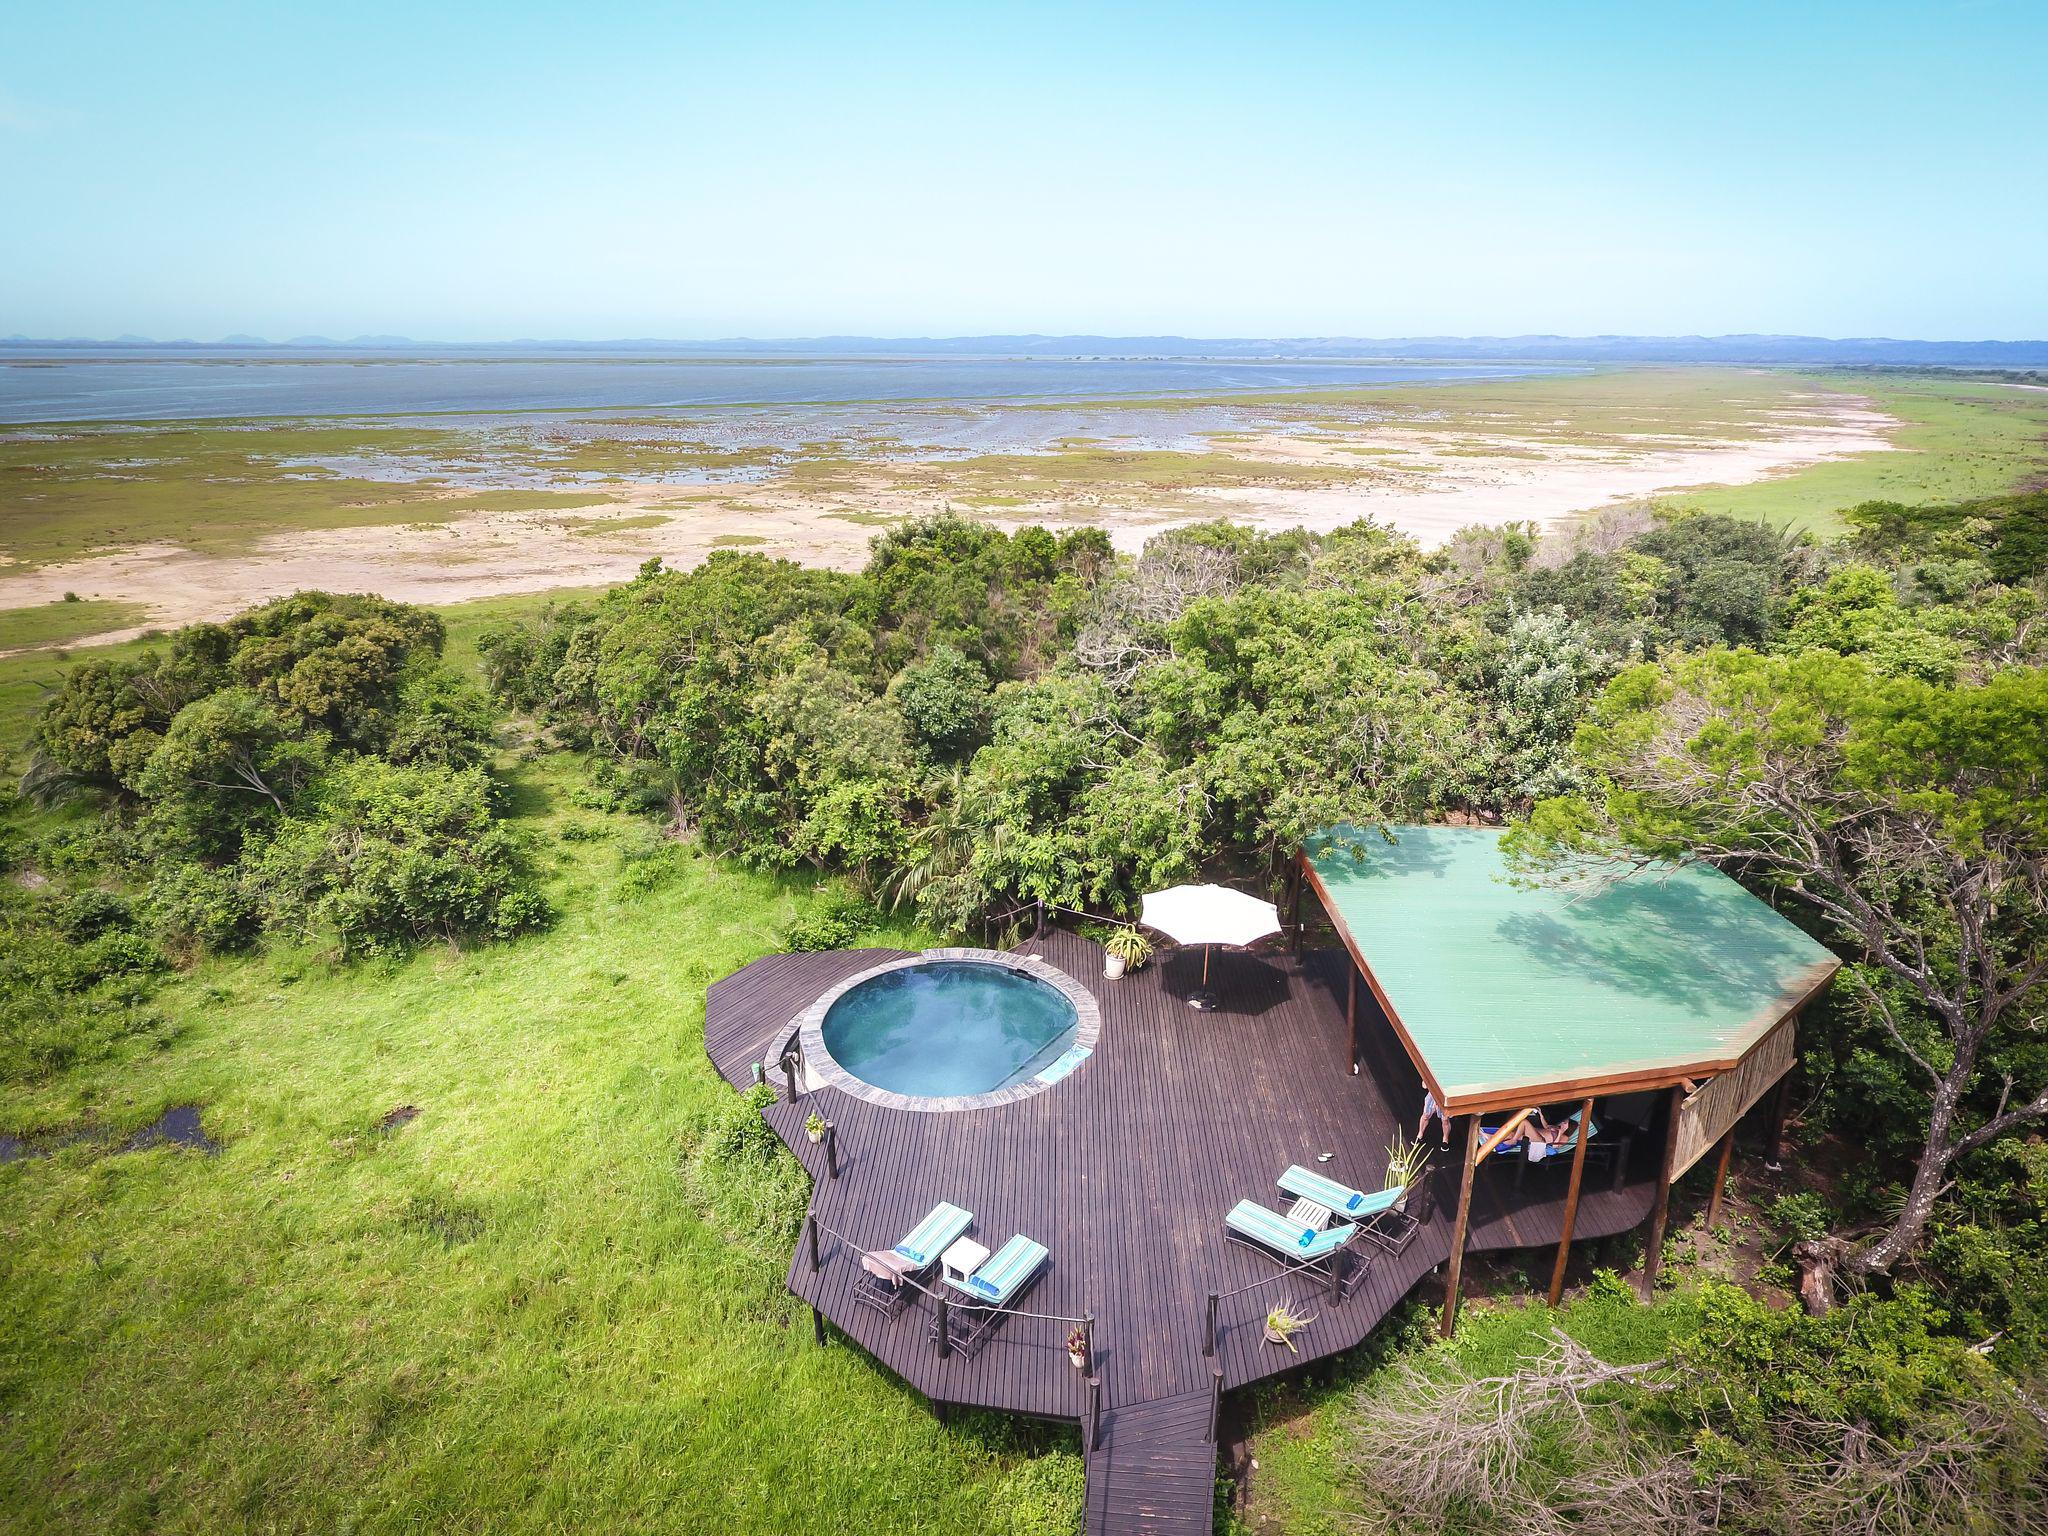 An aerial view of the unspoilt Makakatana Bay Lodge